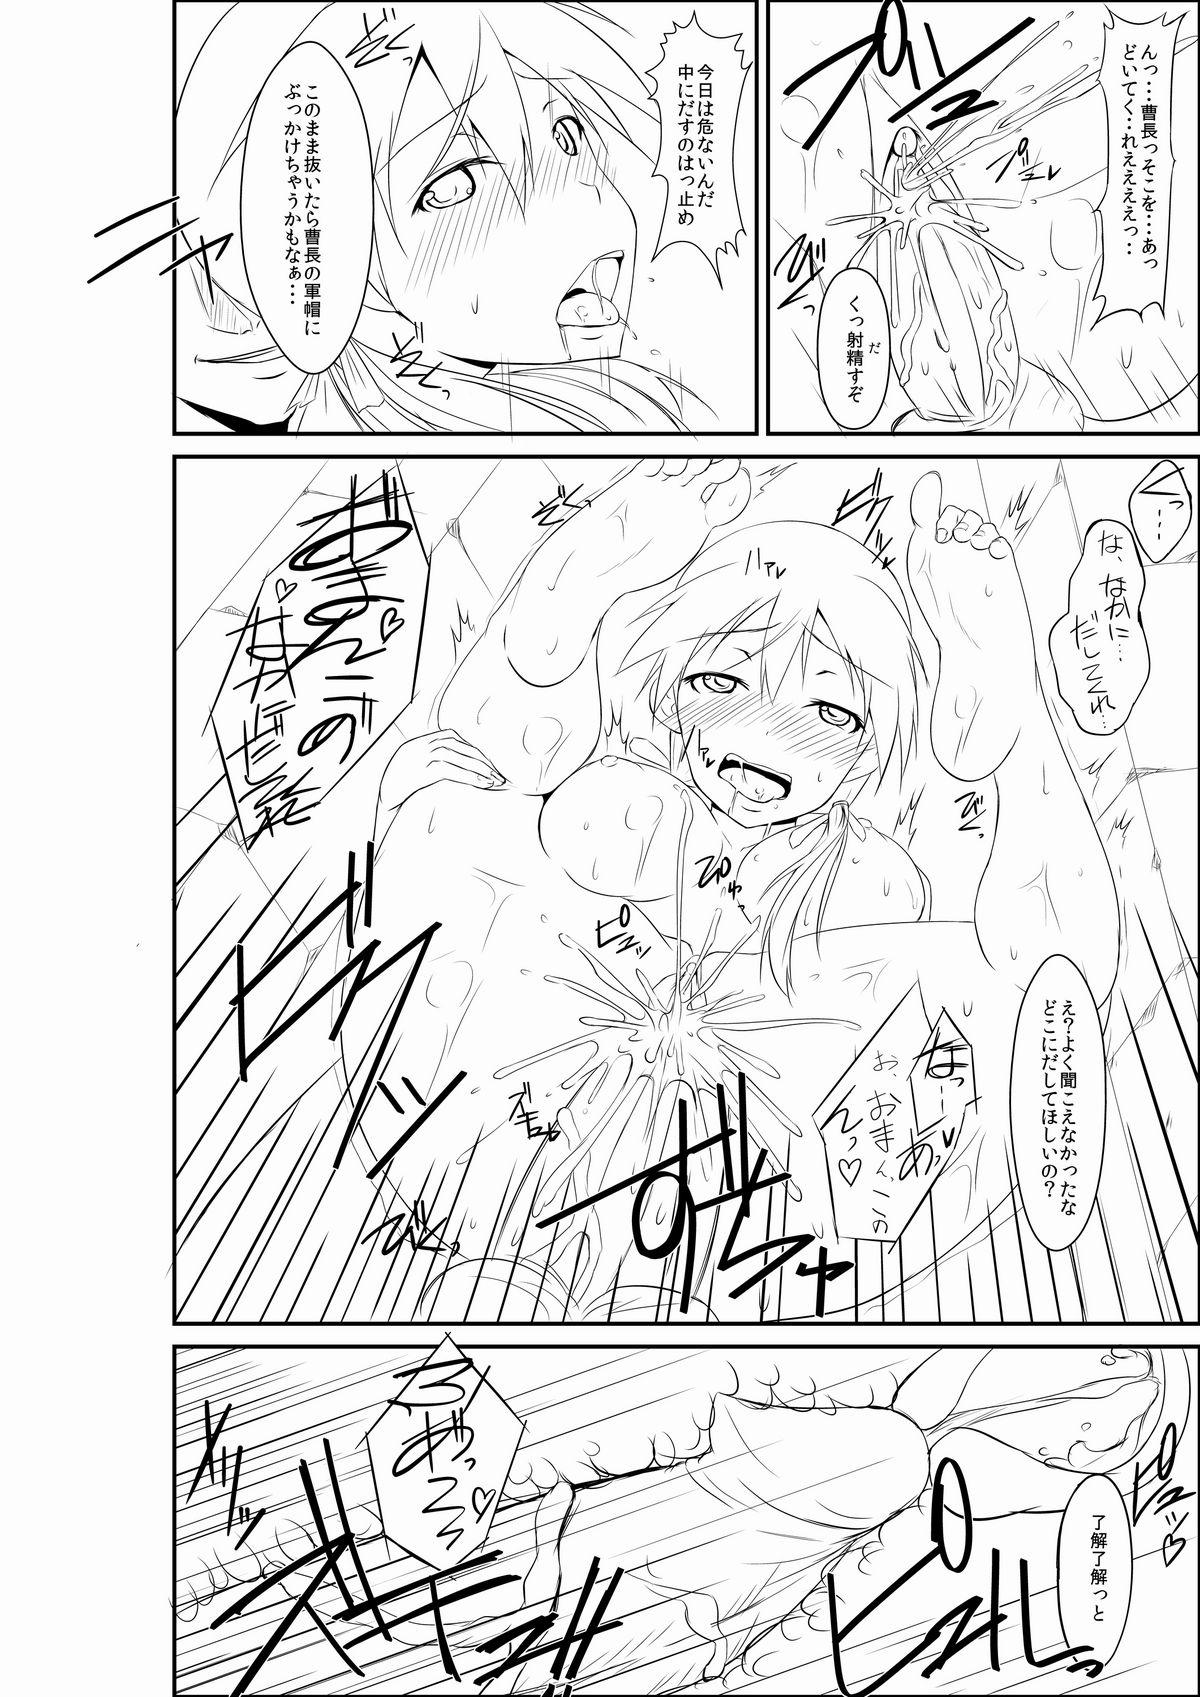 Mom 練習 お姉ちゃんとヘルマちゃん - Strike witches Super Hot Porn - Page 10